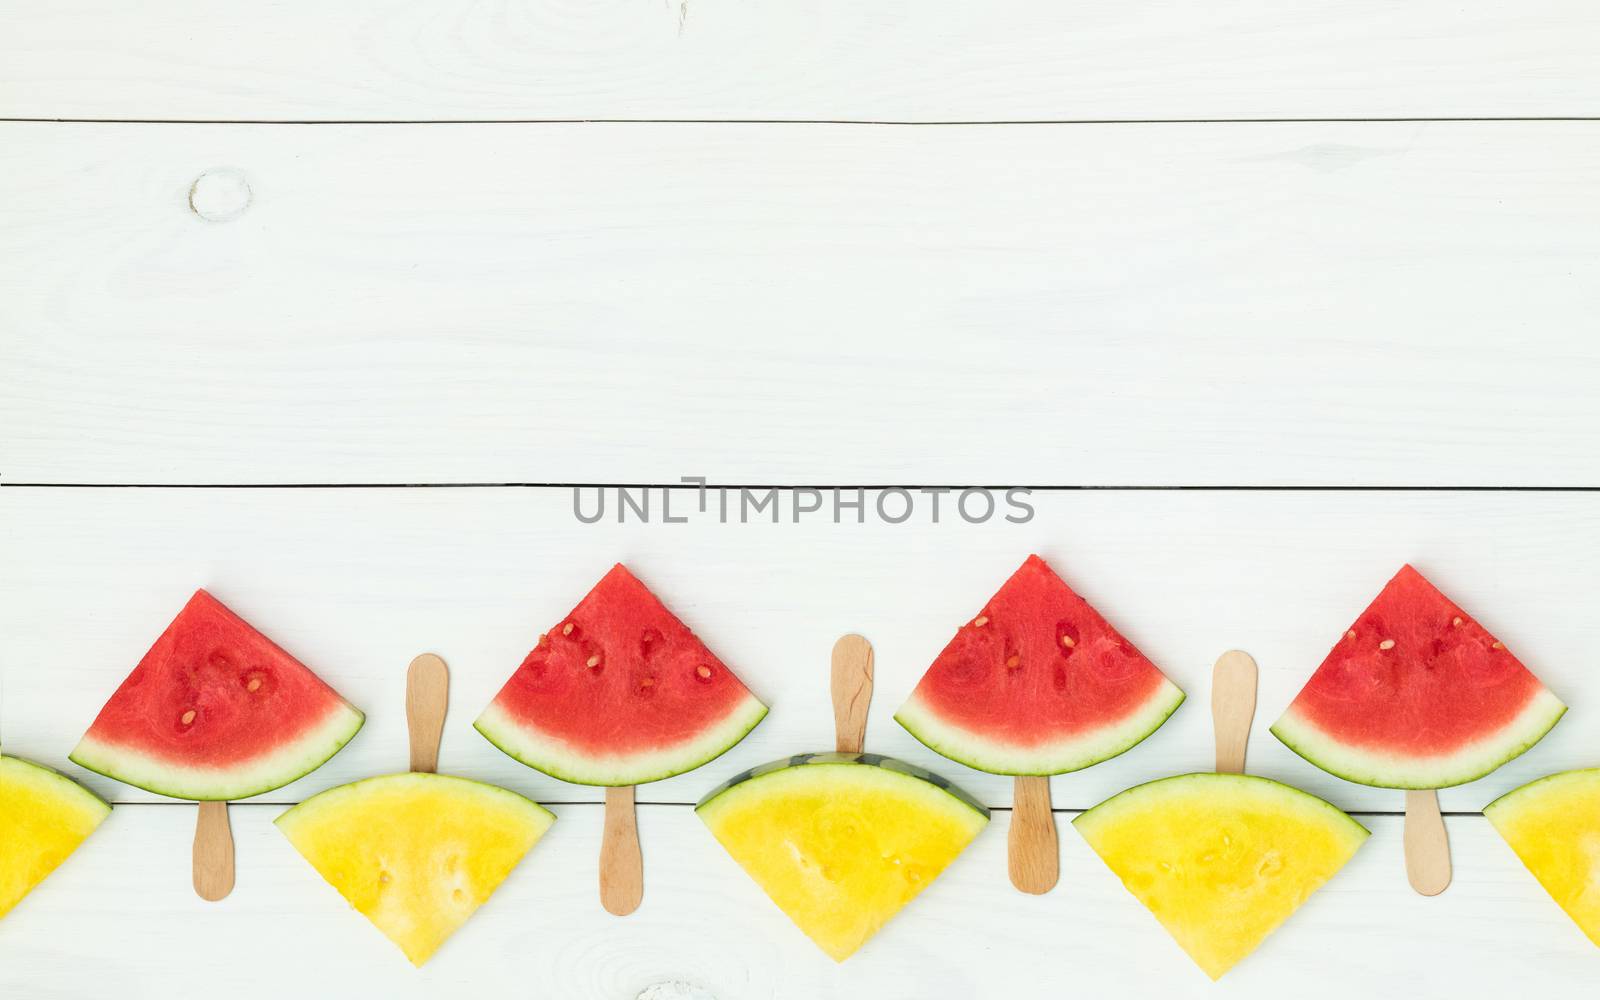 Red and yellow watermelon slices on sticks by ArtSvitlyna